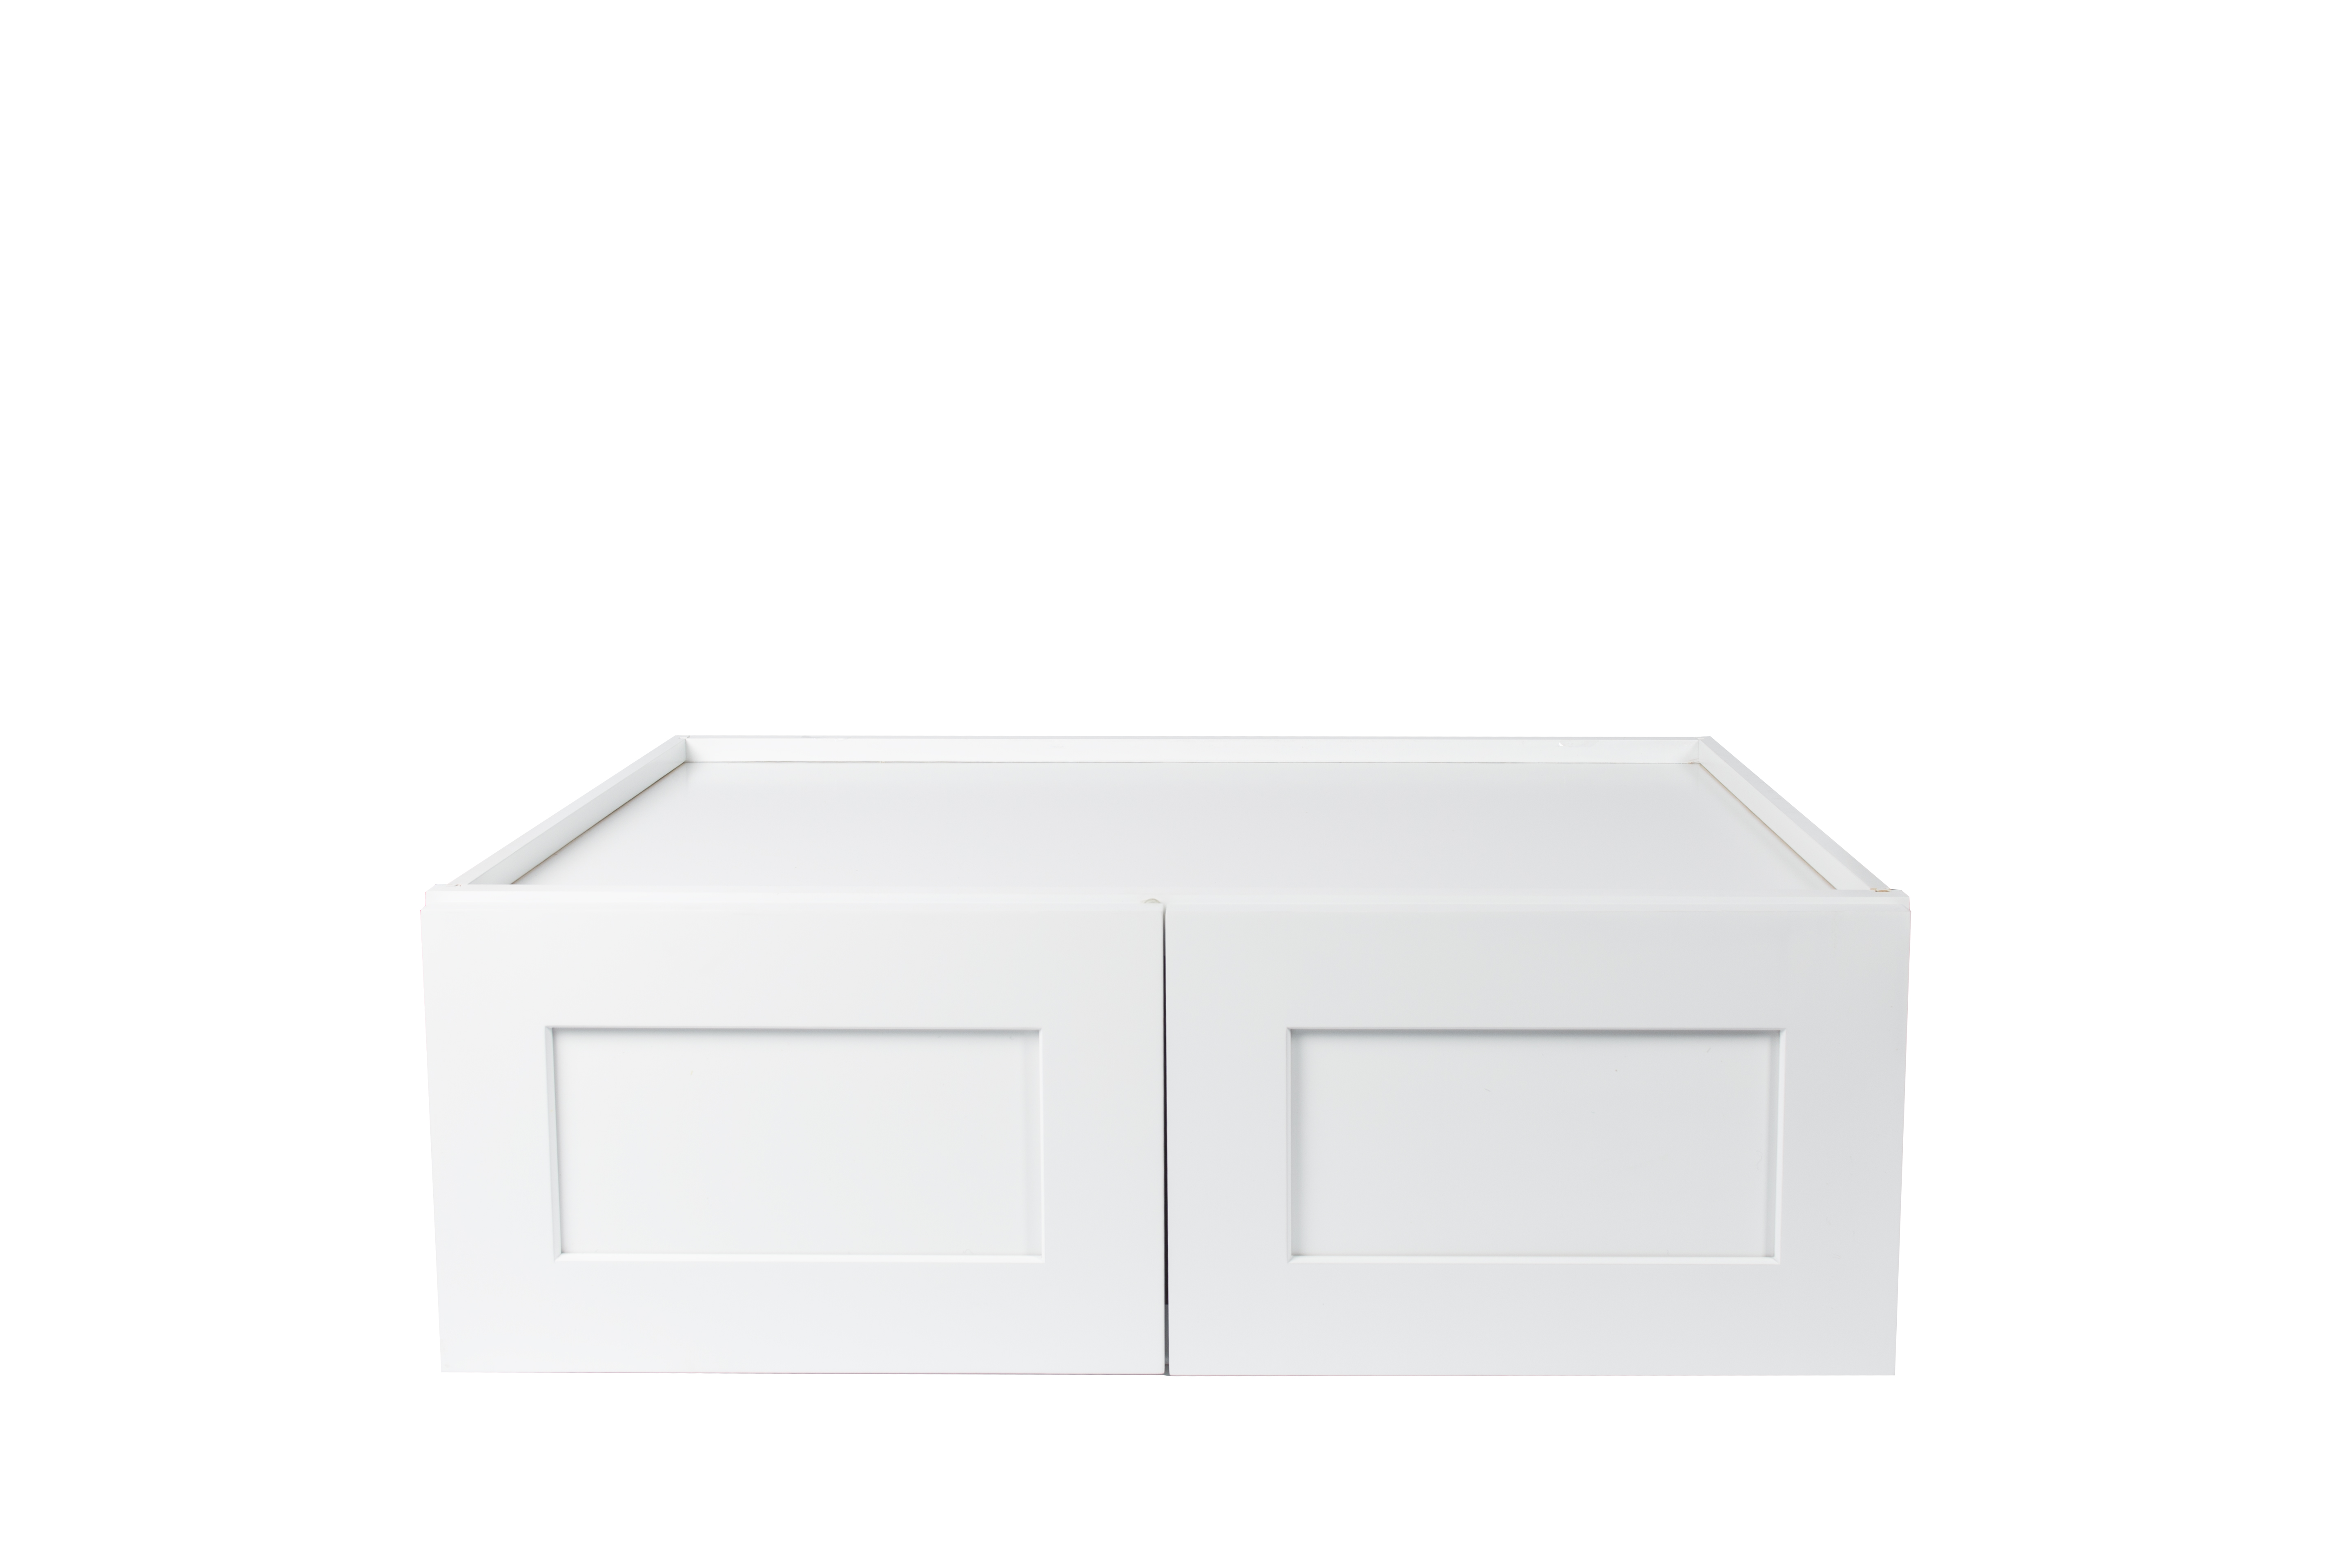 Ready to Assemble 33x21x12 in. Shaker High Double Door Wall Cabinet in White